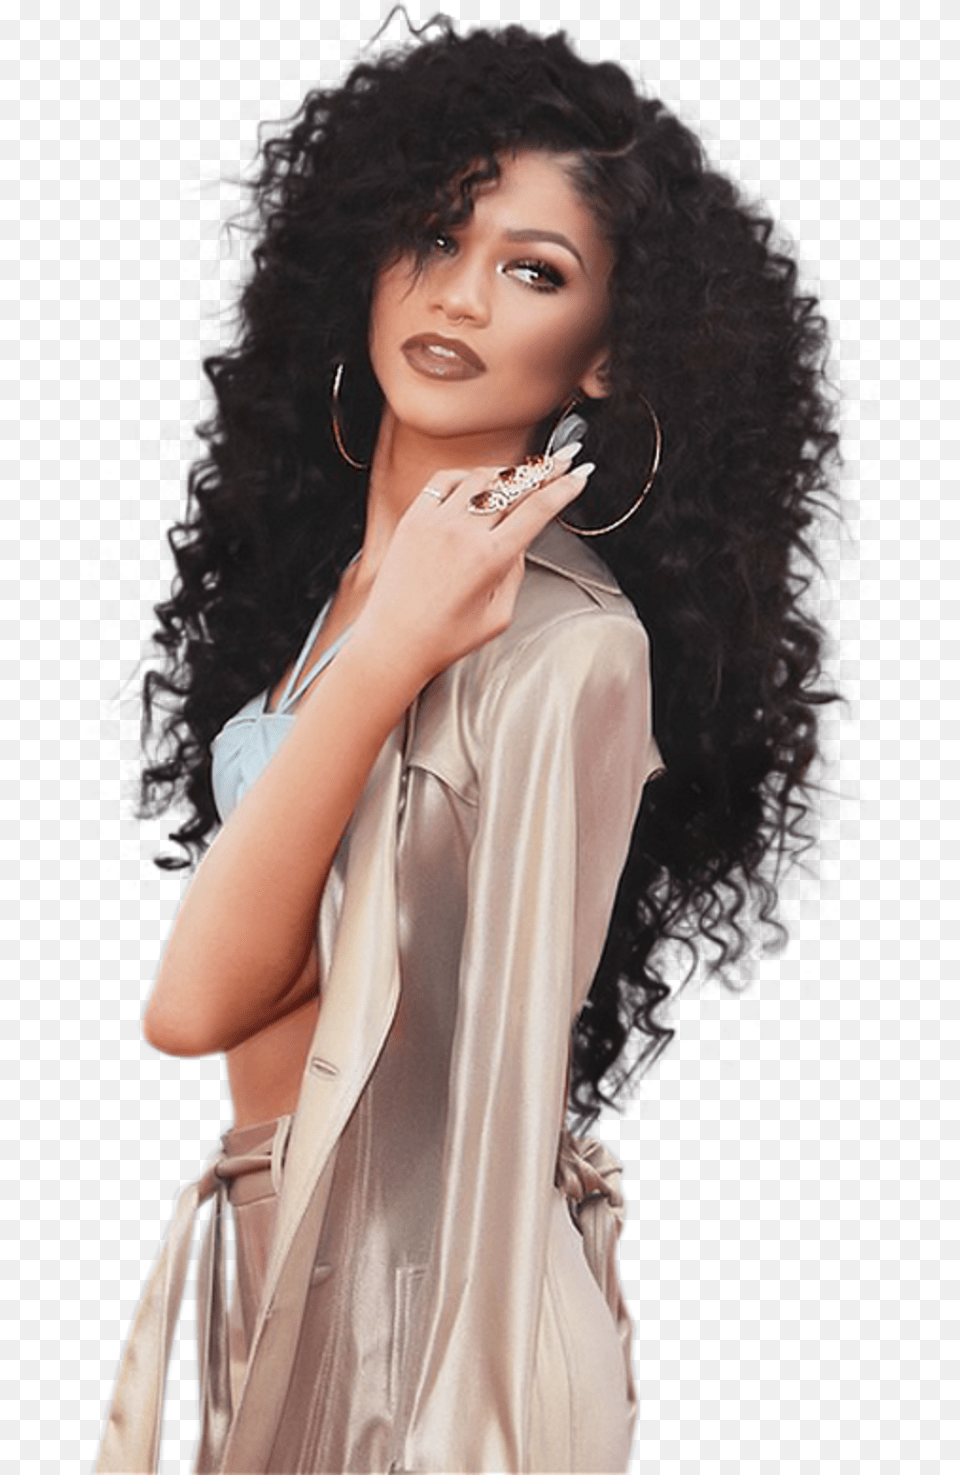 Upnxz86 Te Zendaya Curly Hair 2015, Woman, Head, Female, Face Png Image